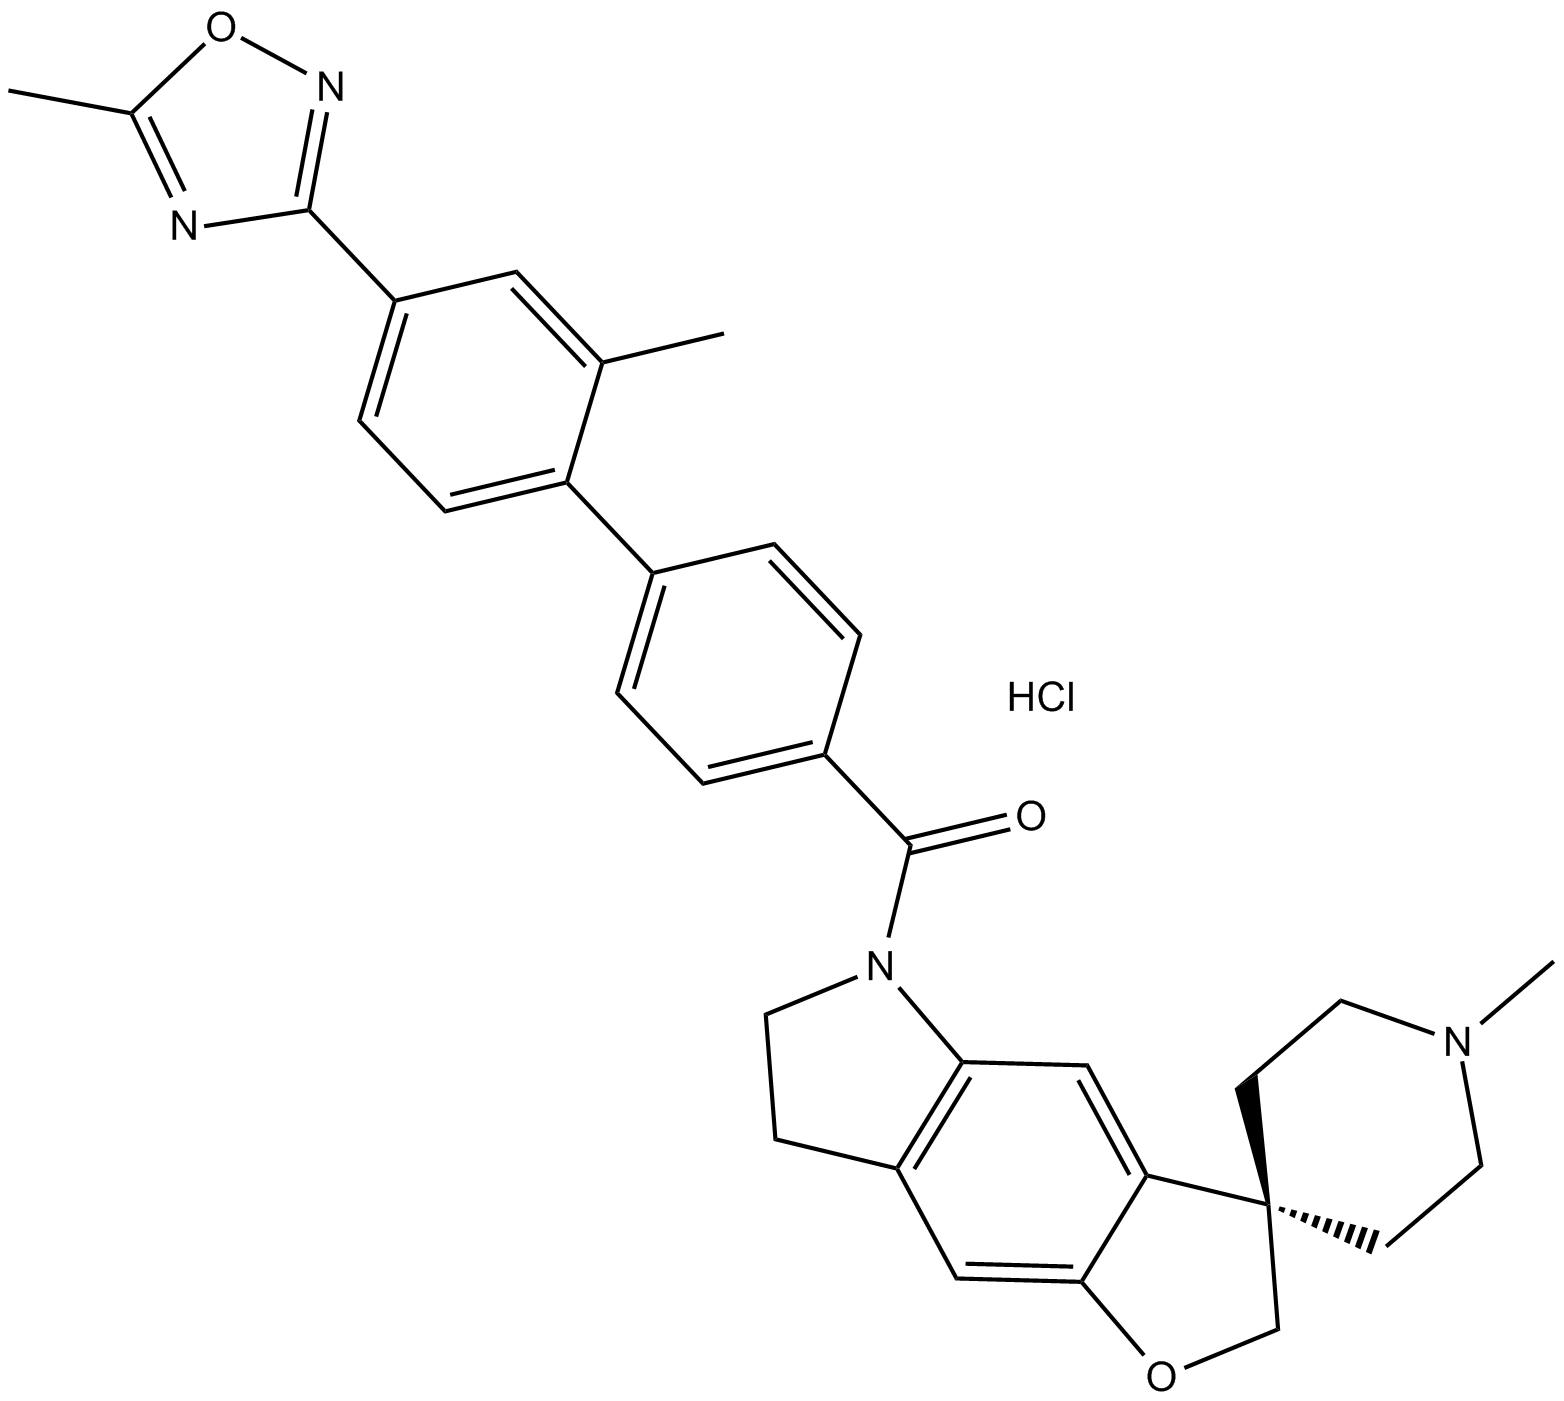 SB 224289 hydrochloride  Chemical Structure